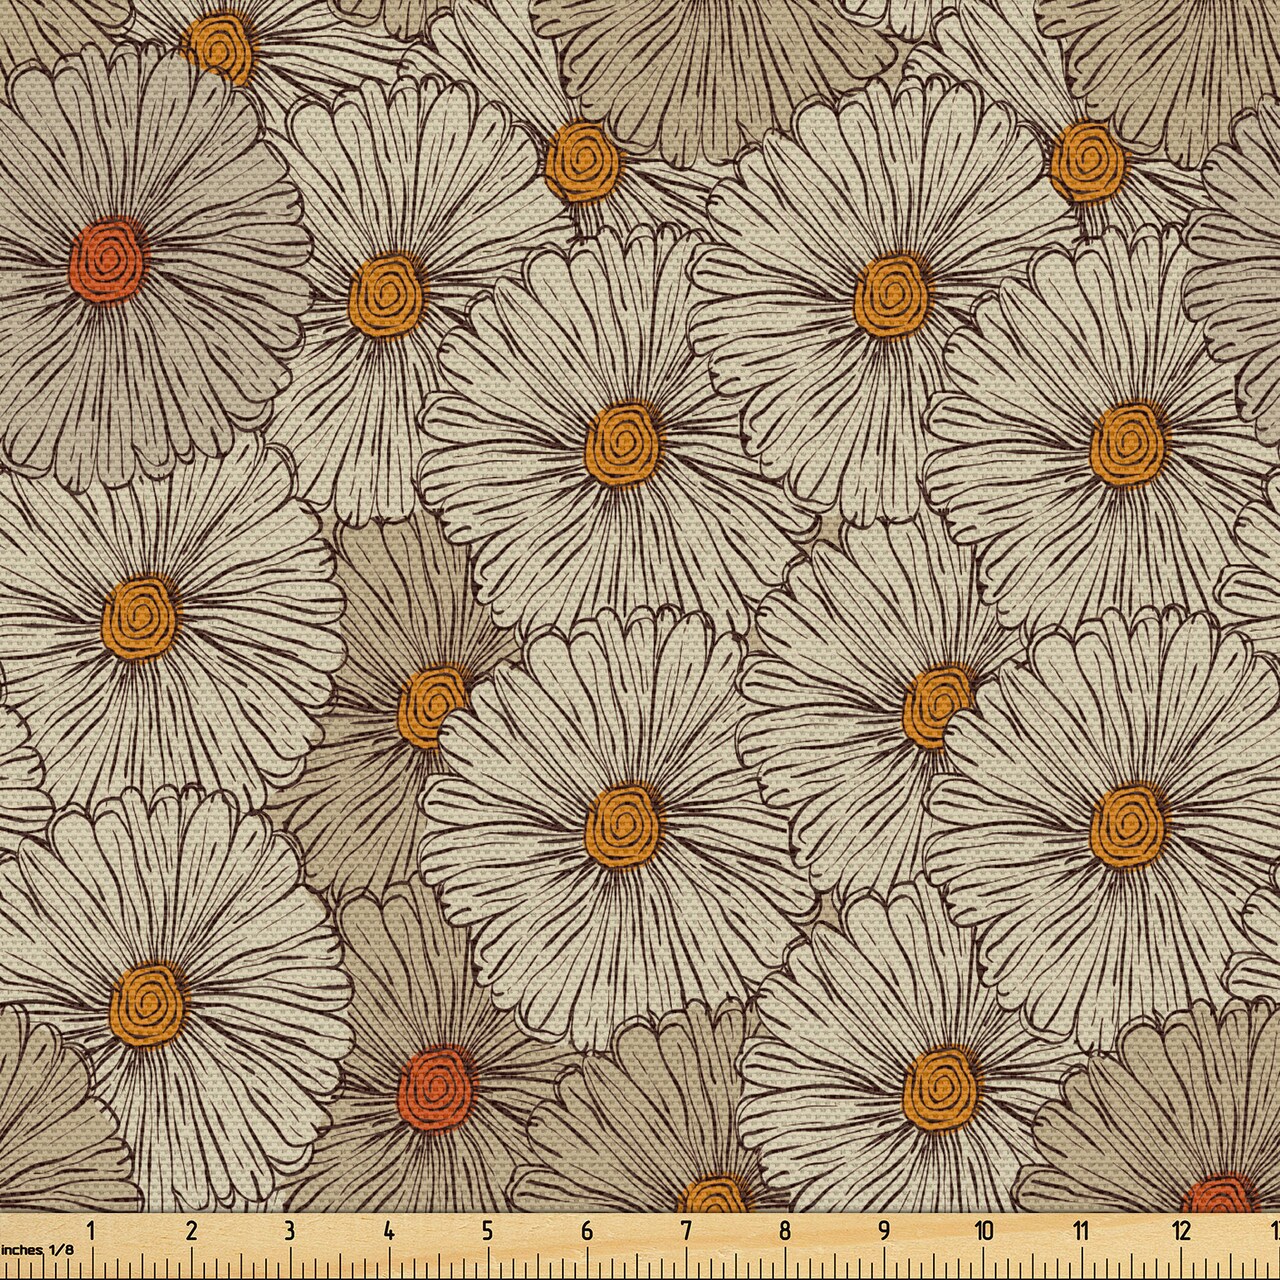 Ambesonne Vintage Fabric by the Yard, Sketch Art Style Gerbera Daisies Abstract Flowers Autumn Garden Flourish, Decorative Fabric for Upholstery and Home Accents, 5 Yards, Tan Orange Marigold